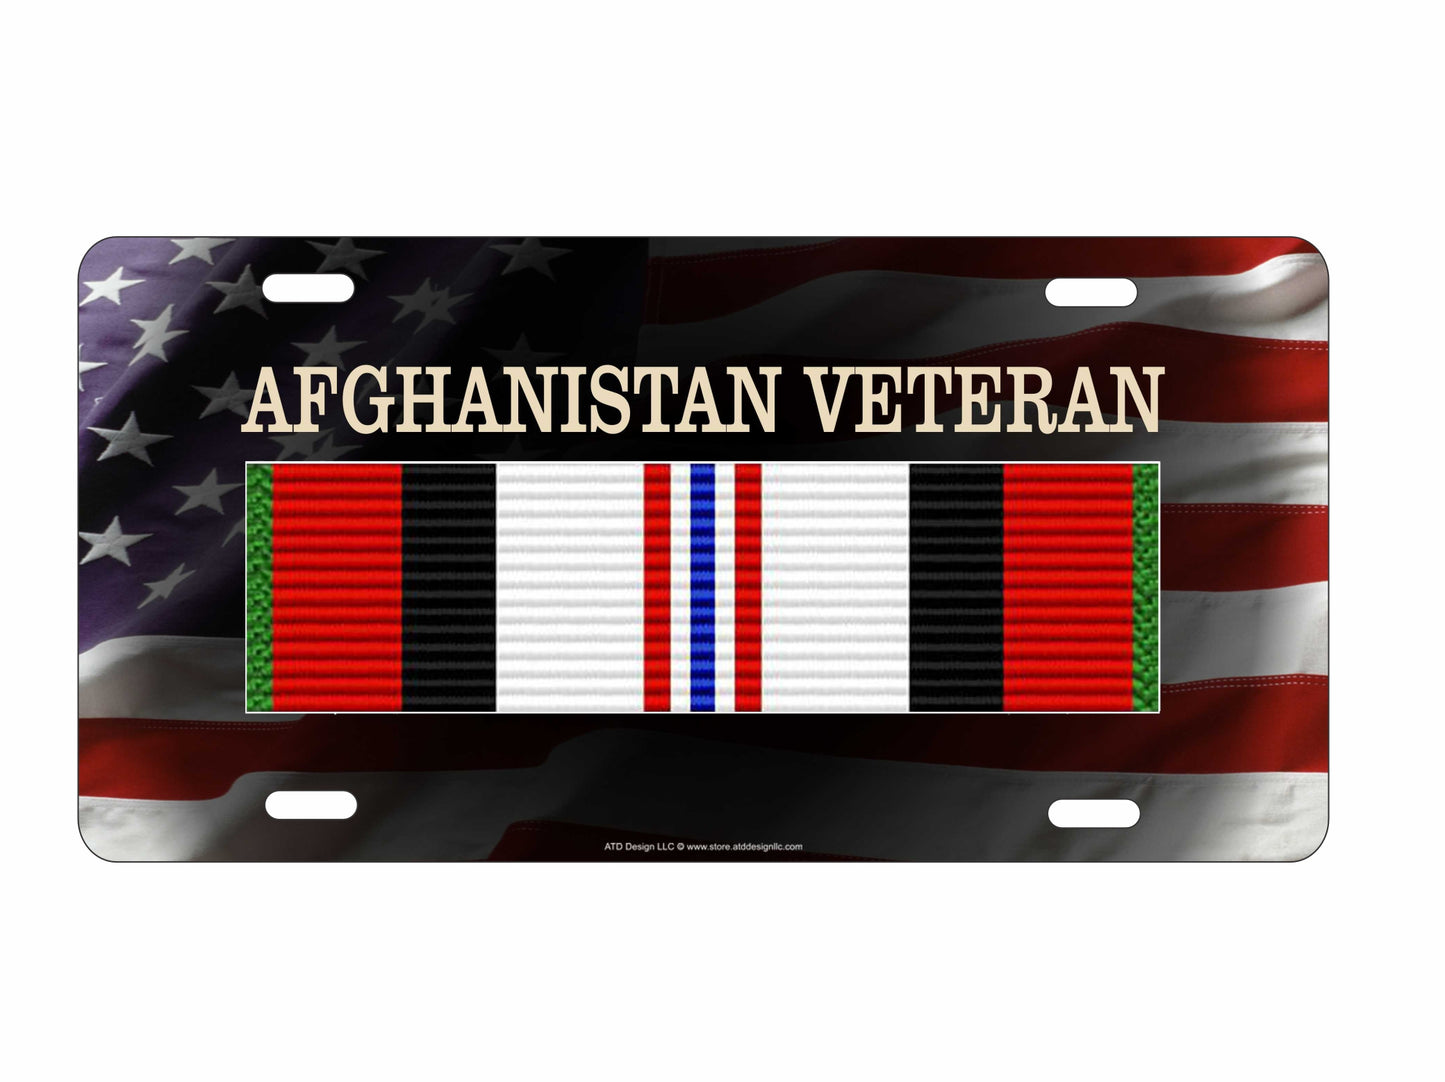 Afghanistan Campaign veteran novelty license plate military decorative aluminum sign